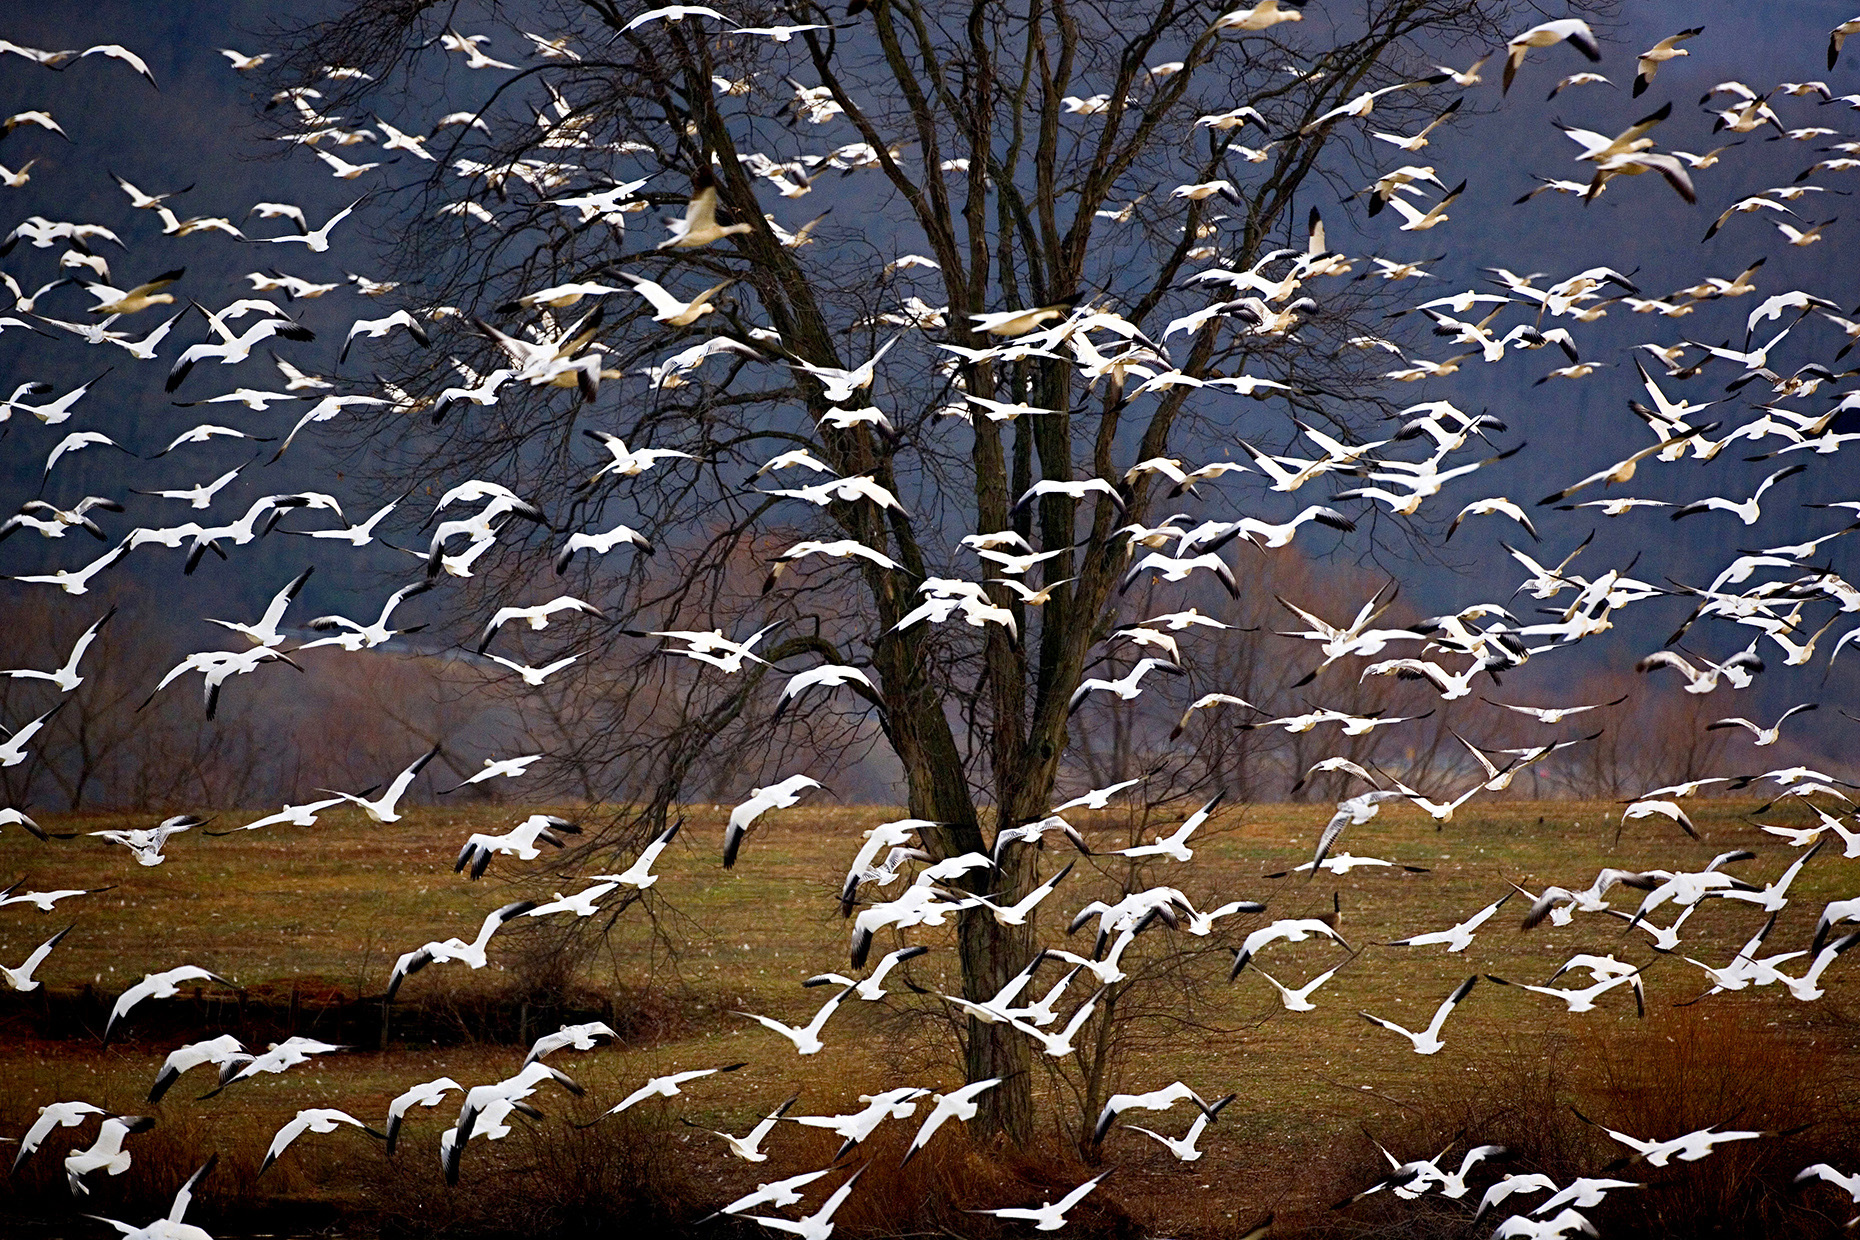 SnowGeese